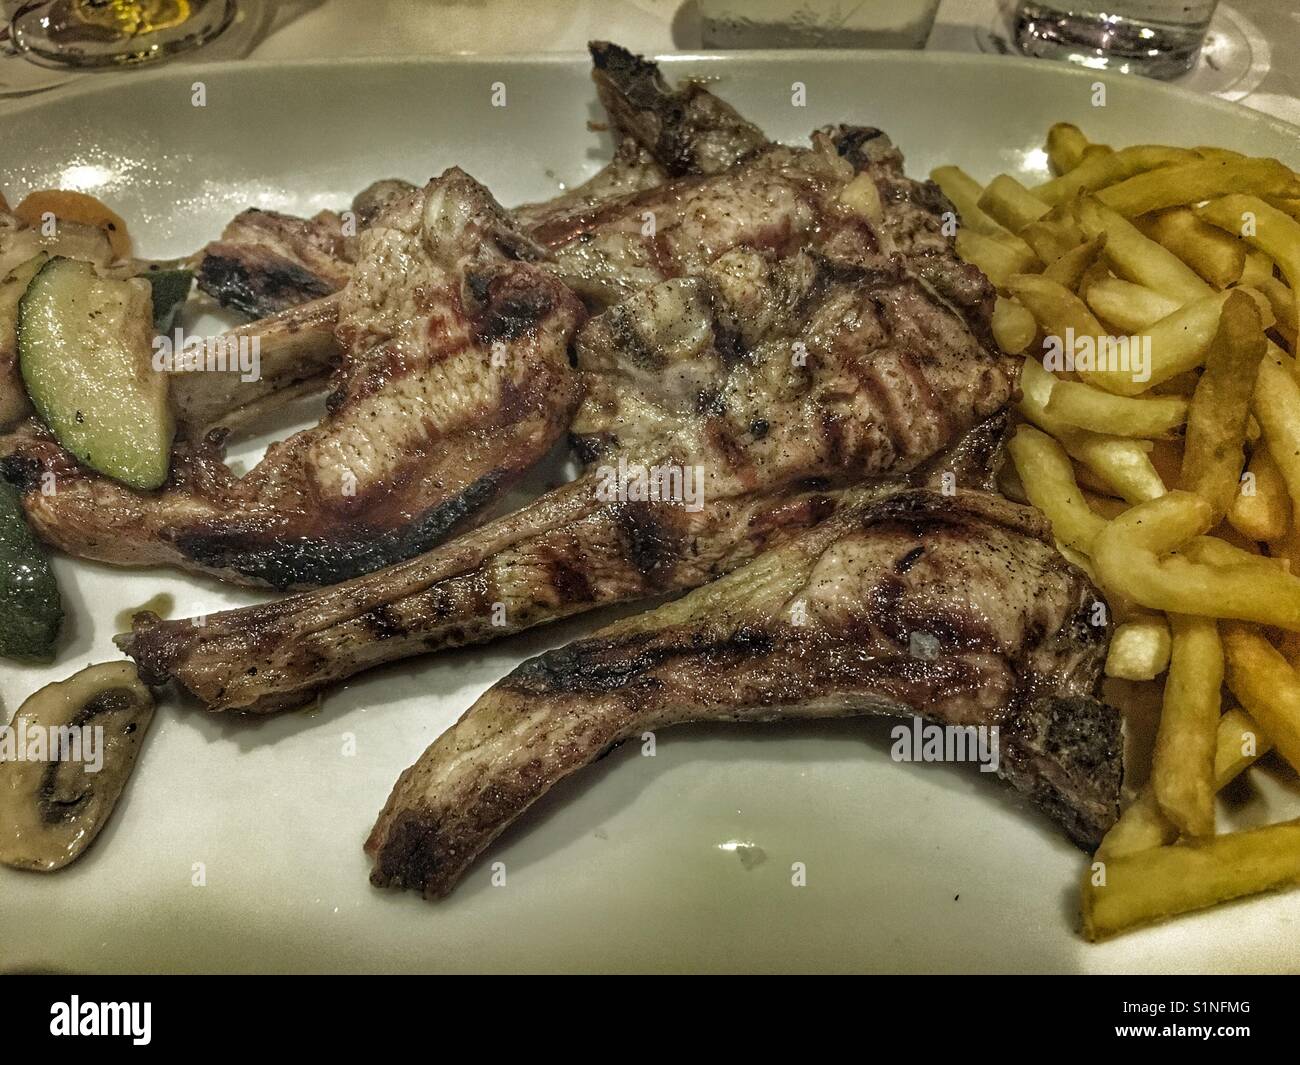 Grilled lamb chops and chips, typical Spanish meal Stock Photo